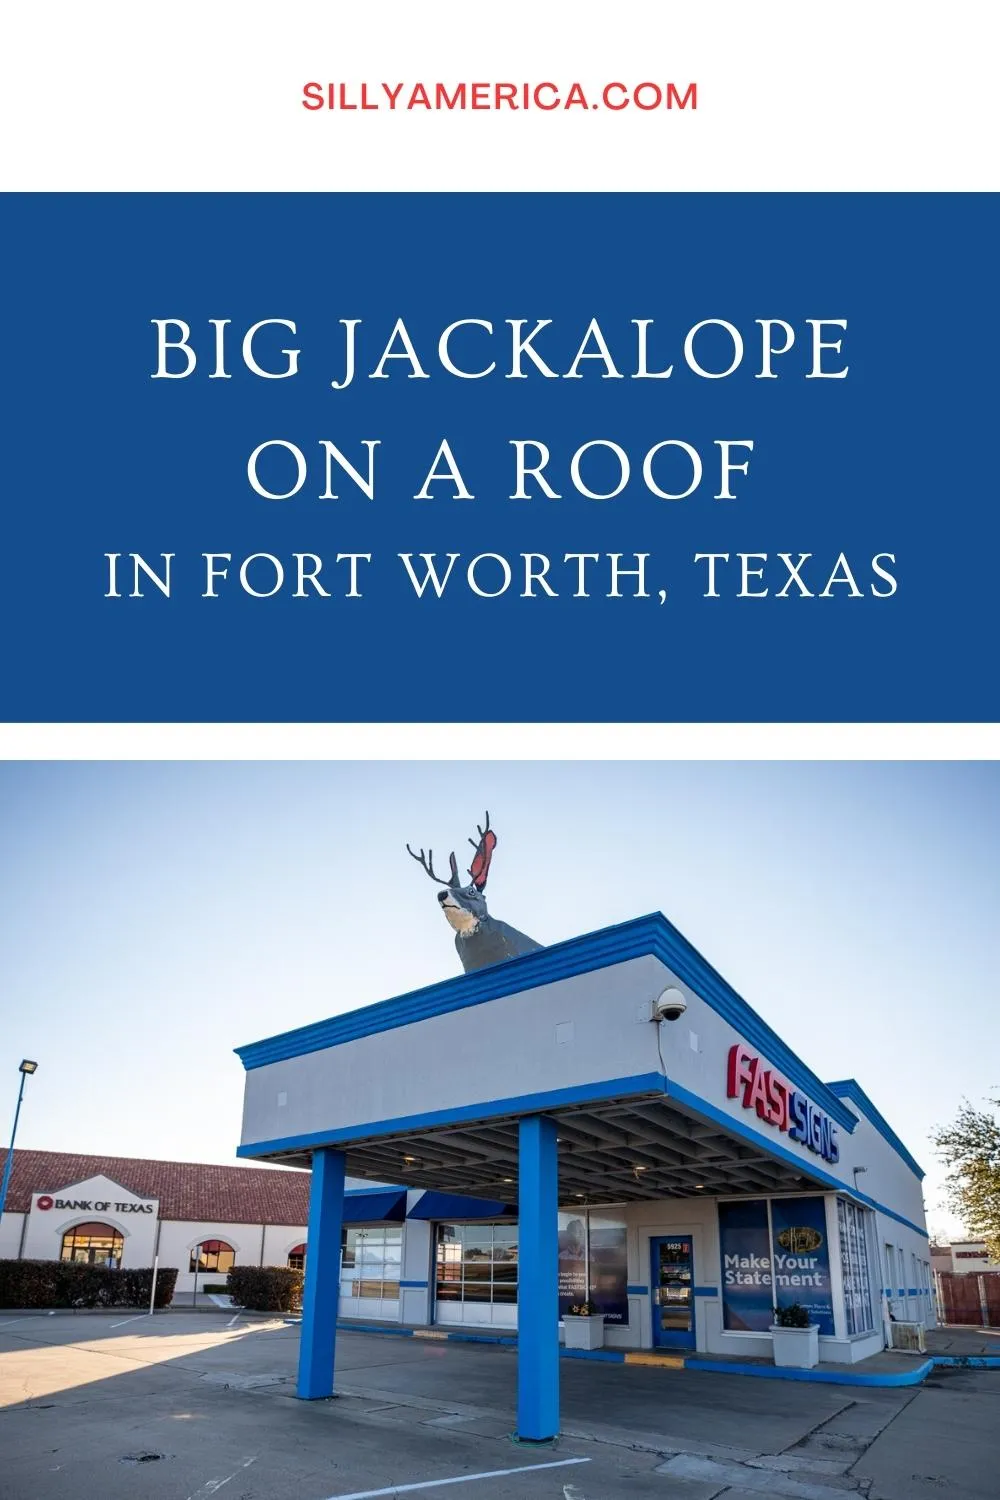 Even if you know jack about roadside attractions, you could probably guess that this one is a hare above the rest. It's the Big Jackalope on a Roof in Fort Worth, Texas. Visit this beloved local favorite roadside attraction on your next Texas road trip. Add it to your travel itinerary! #RoadTrip #TexasRoadTrip #FortWorth #FortWorthTexas #FortWorthAttractions #FortWorthTexasAttractions #RoadsideAttraction #RoadsideAttractions #TexasRoadsideAttraction #TexasRoadsideAttractions